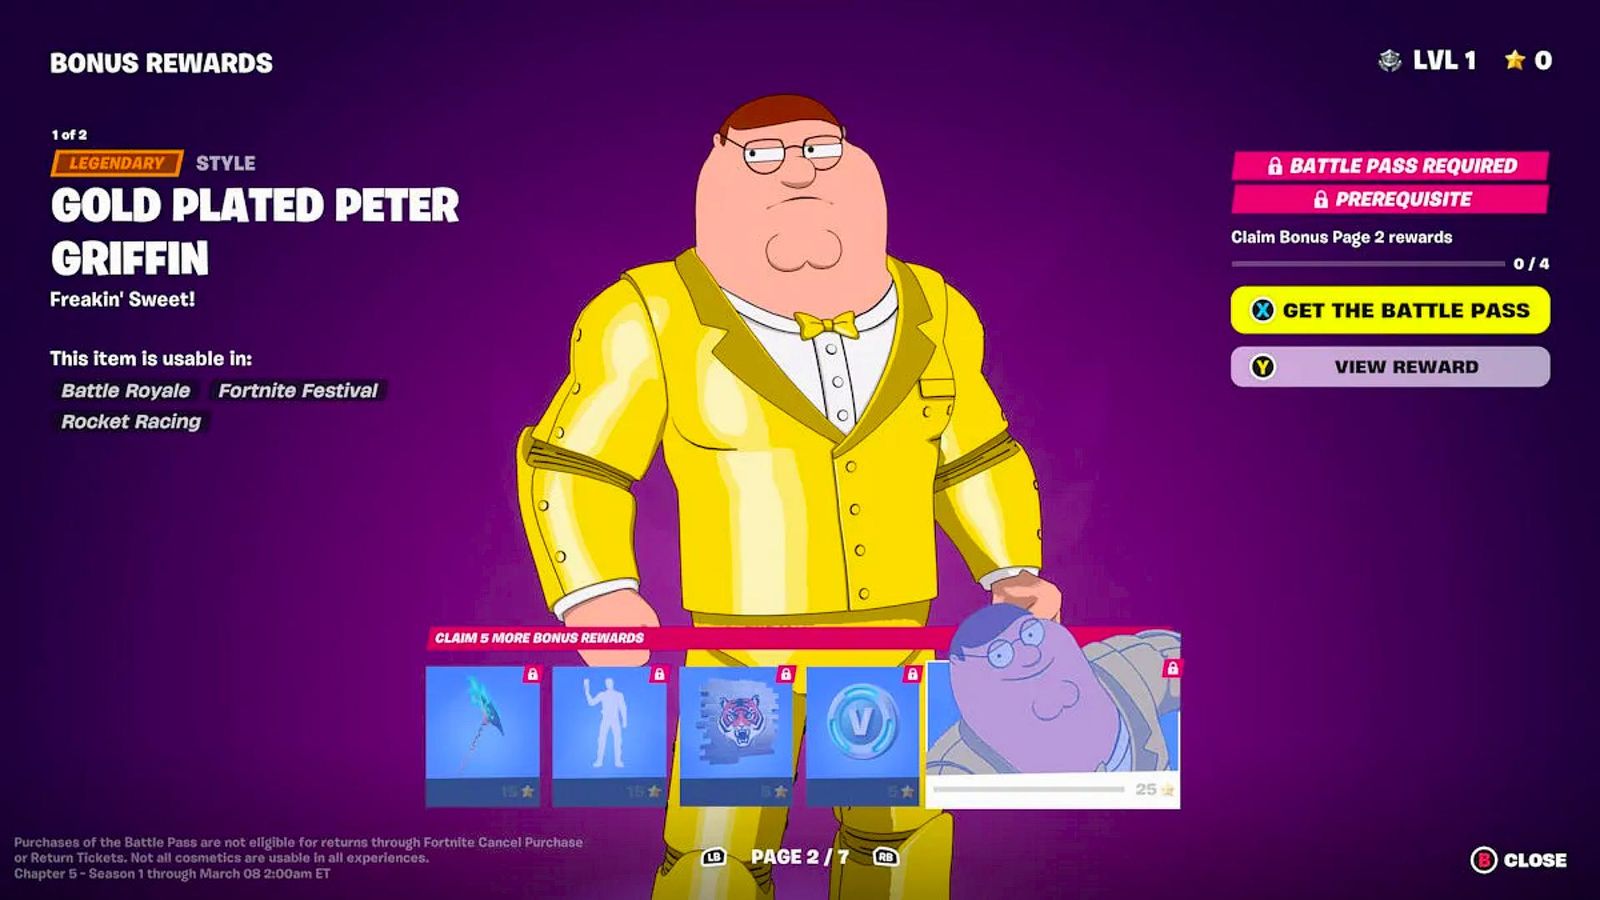 The Gold Plated Peter Griffin skin style